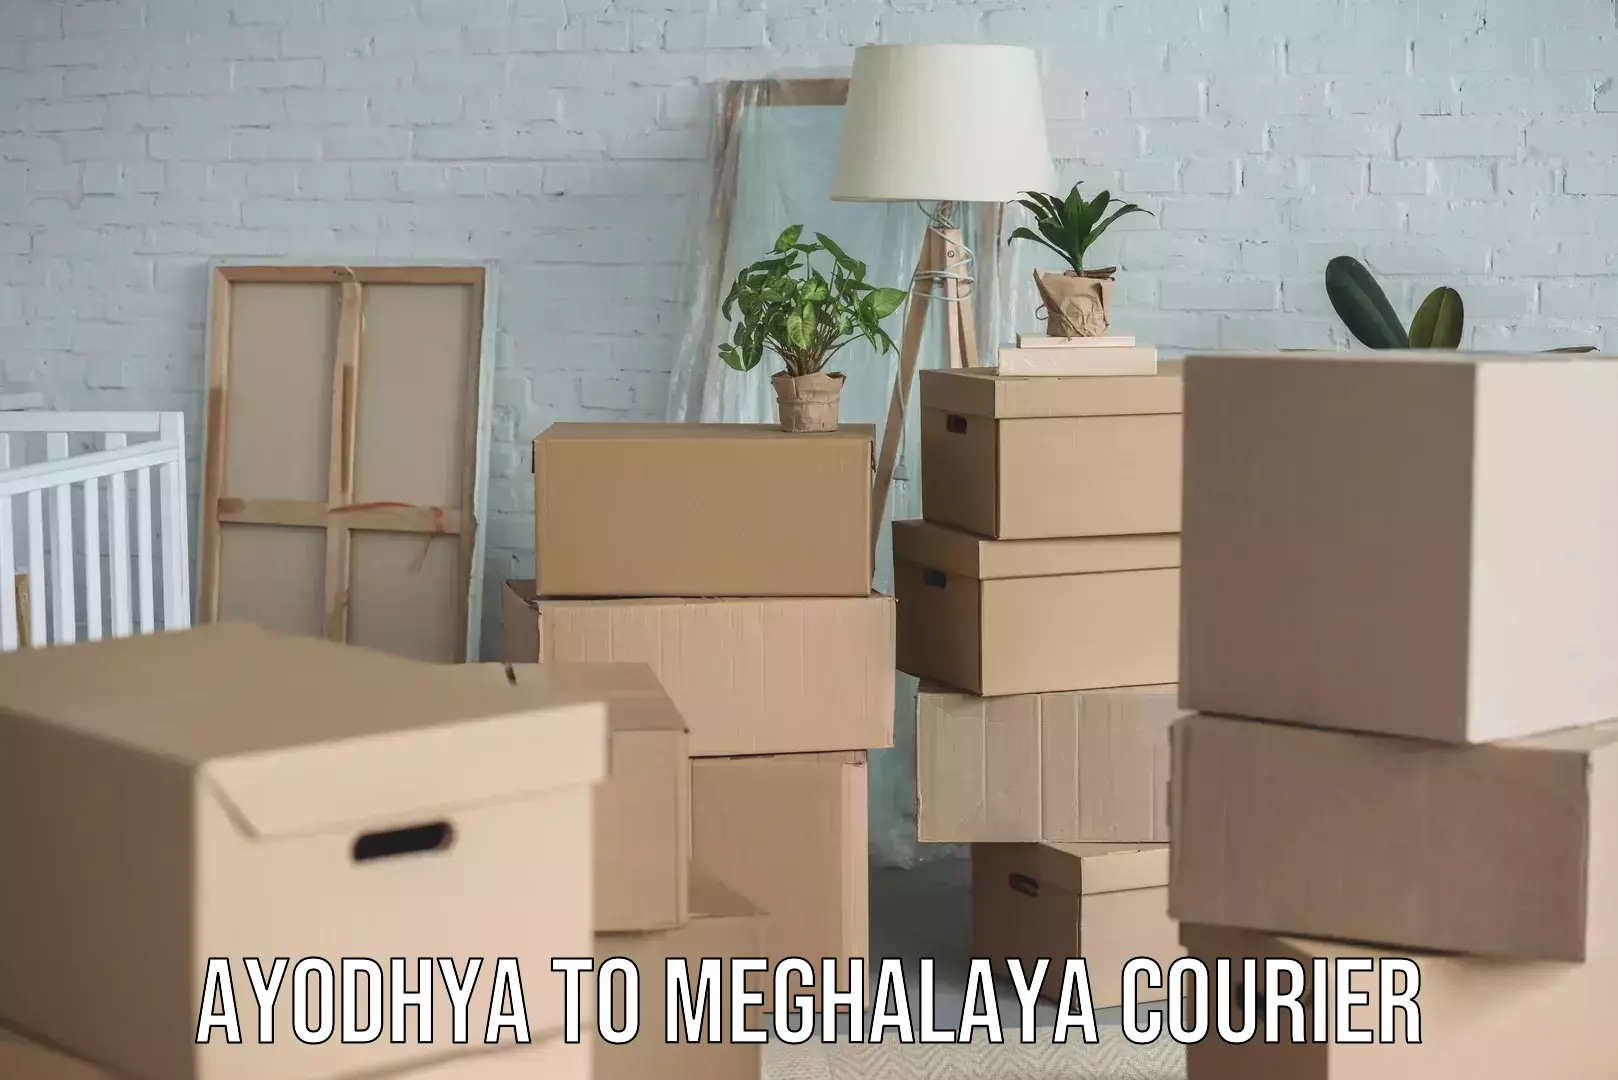 Parcel handling and care Ayodhya to Meghalaya